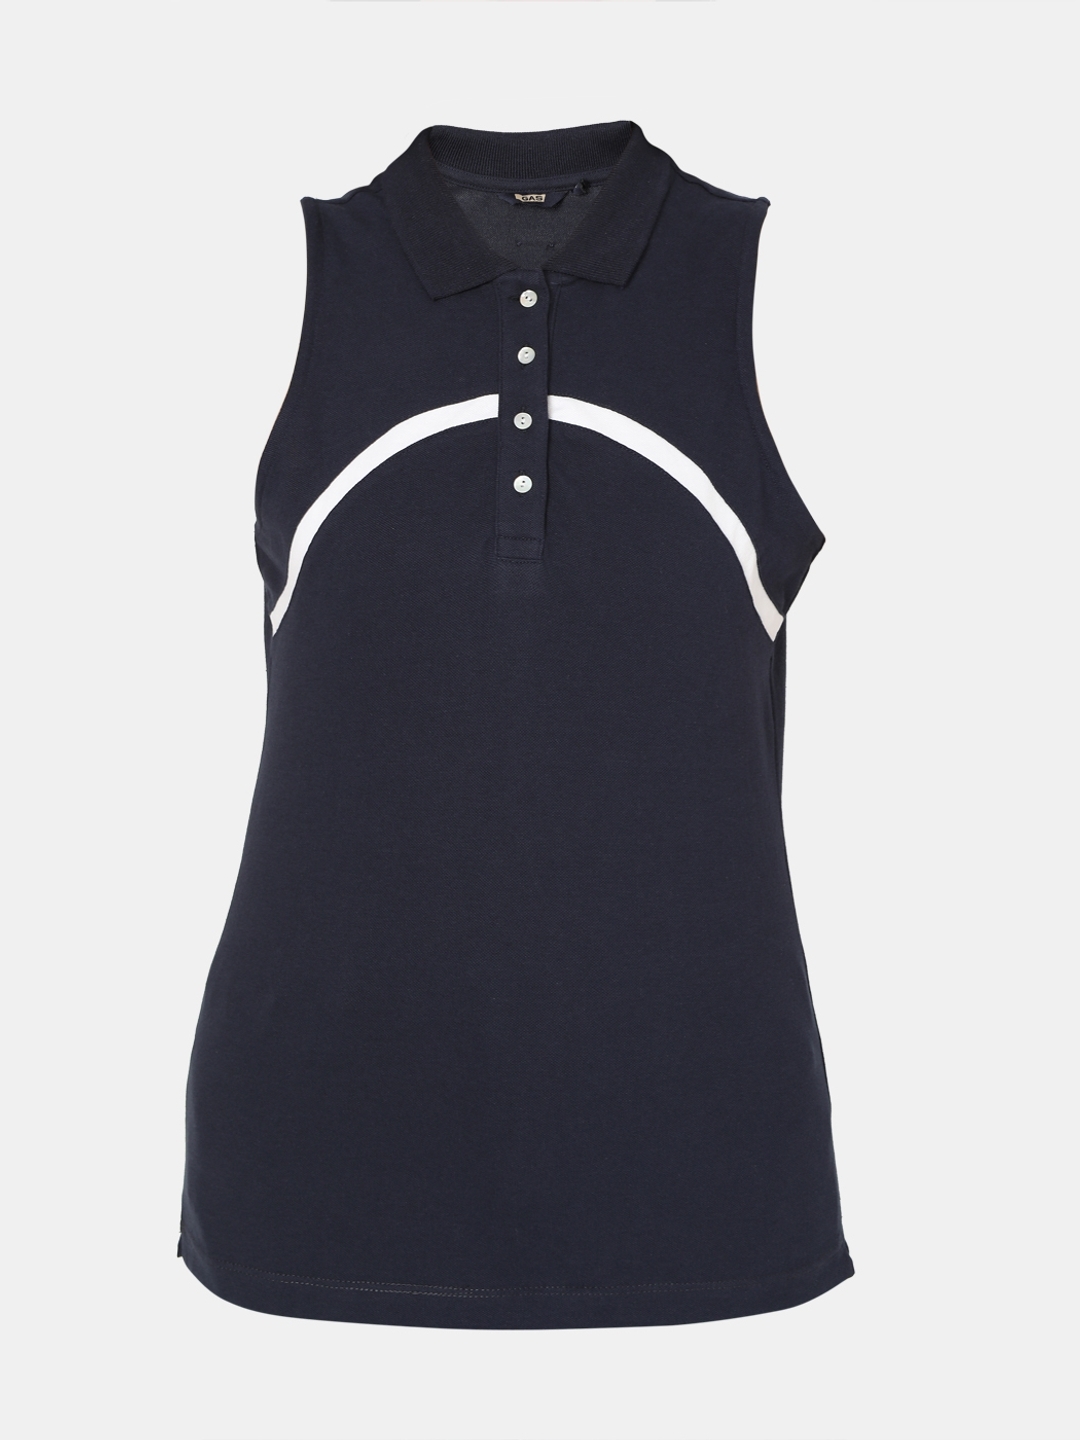 Sleeveless Slim Fit Top with Shirt Collar